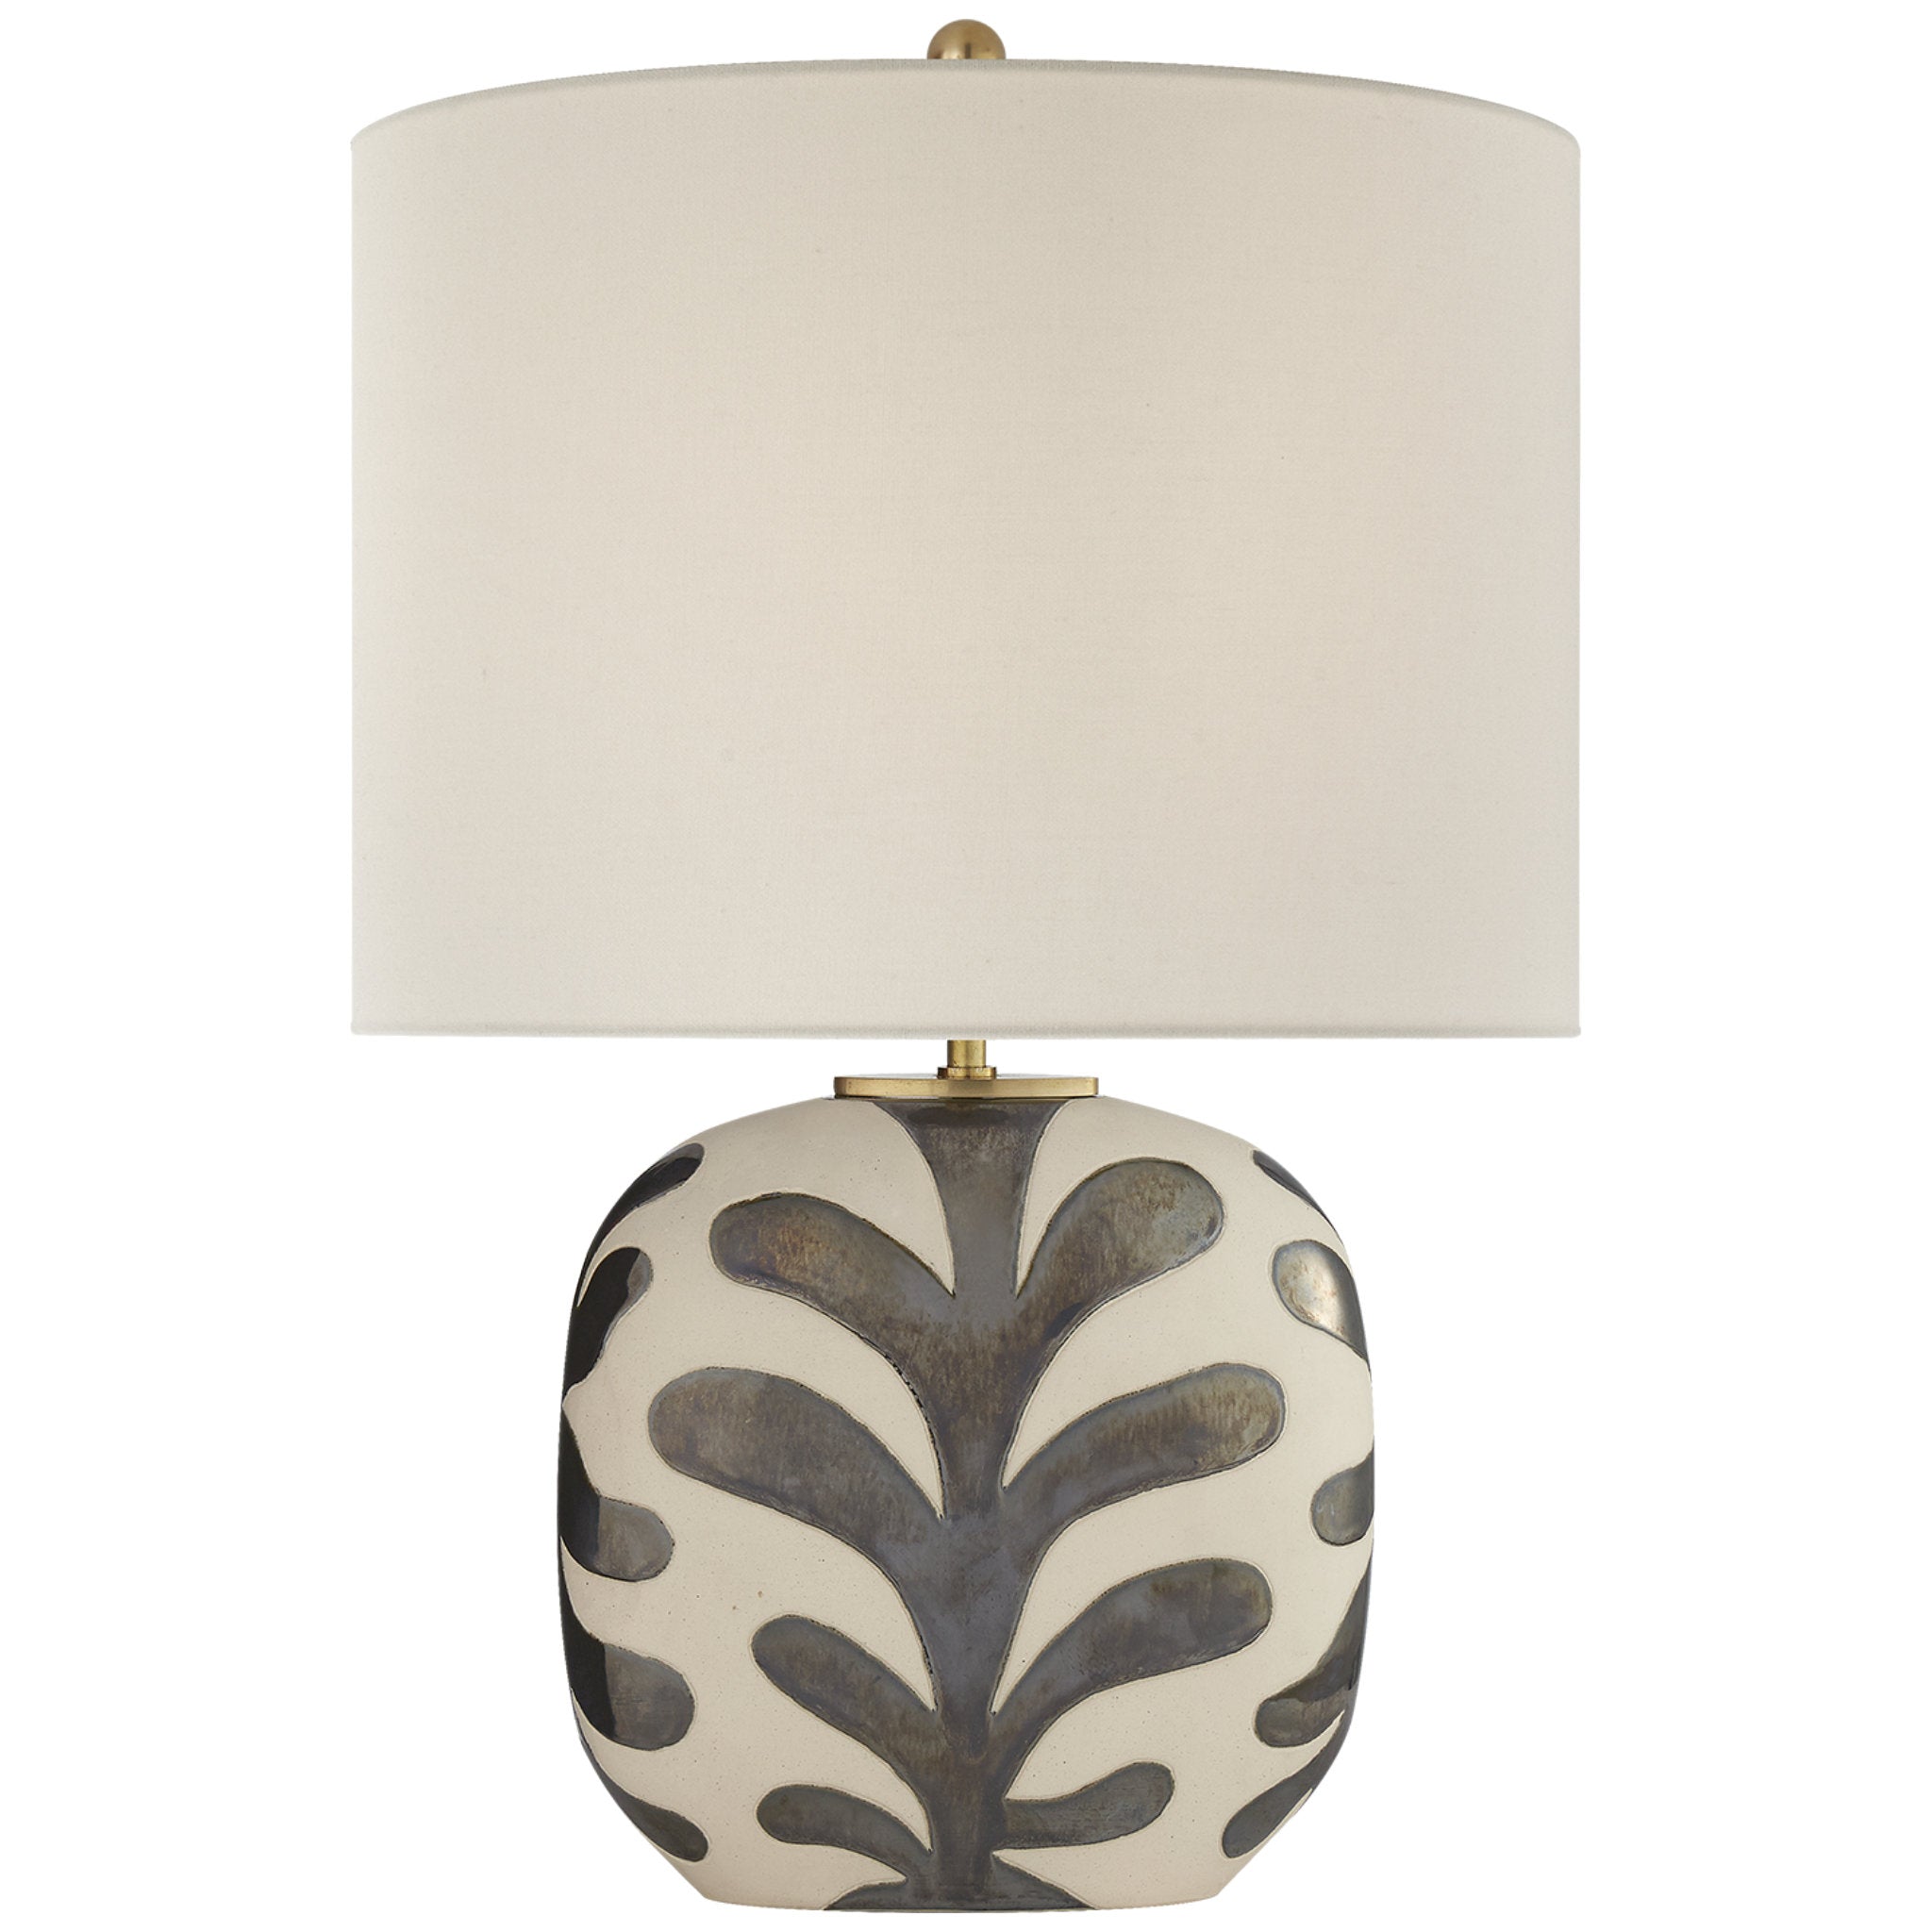 kate spade new york Parkwood Medium Table Lamp in Natural Bisque and Black Pearl with Linen Shade